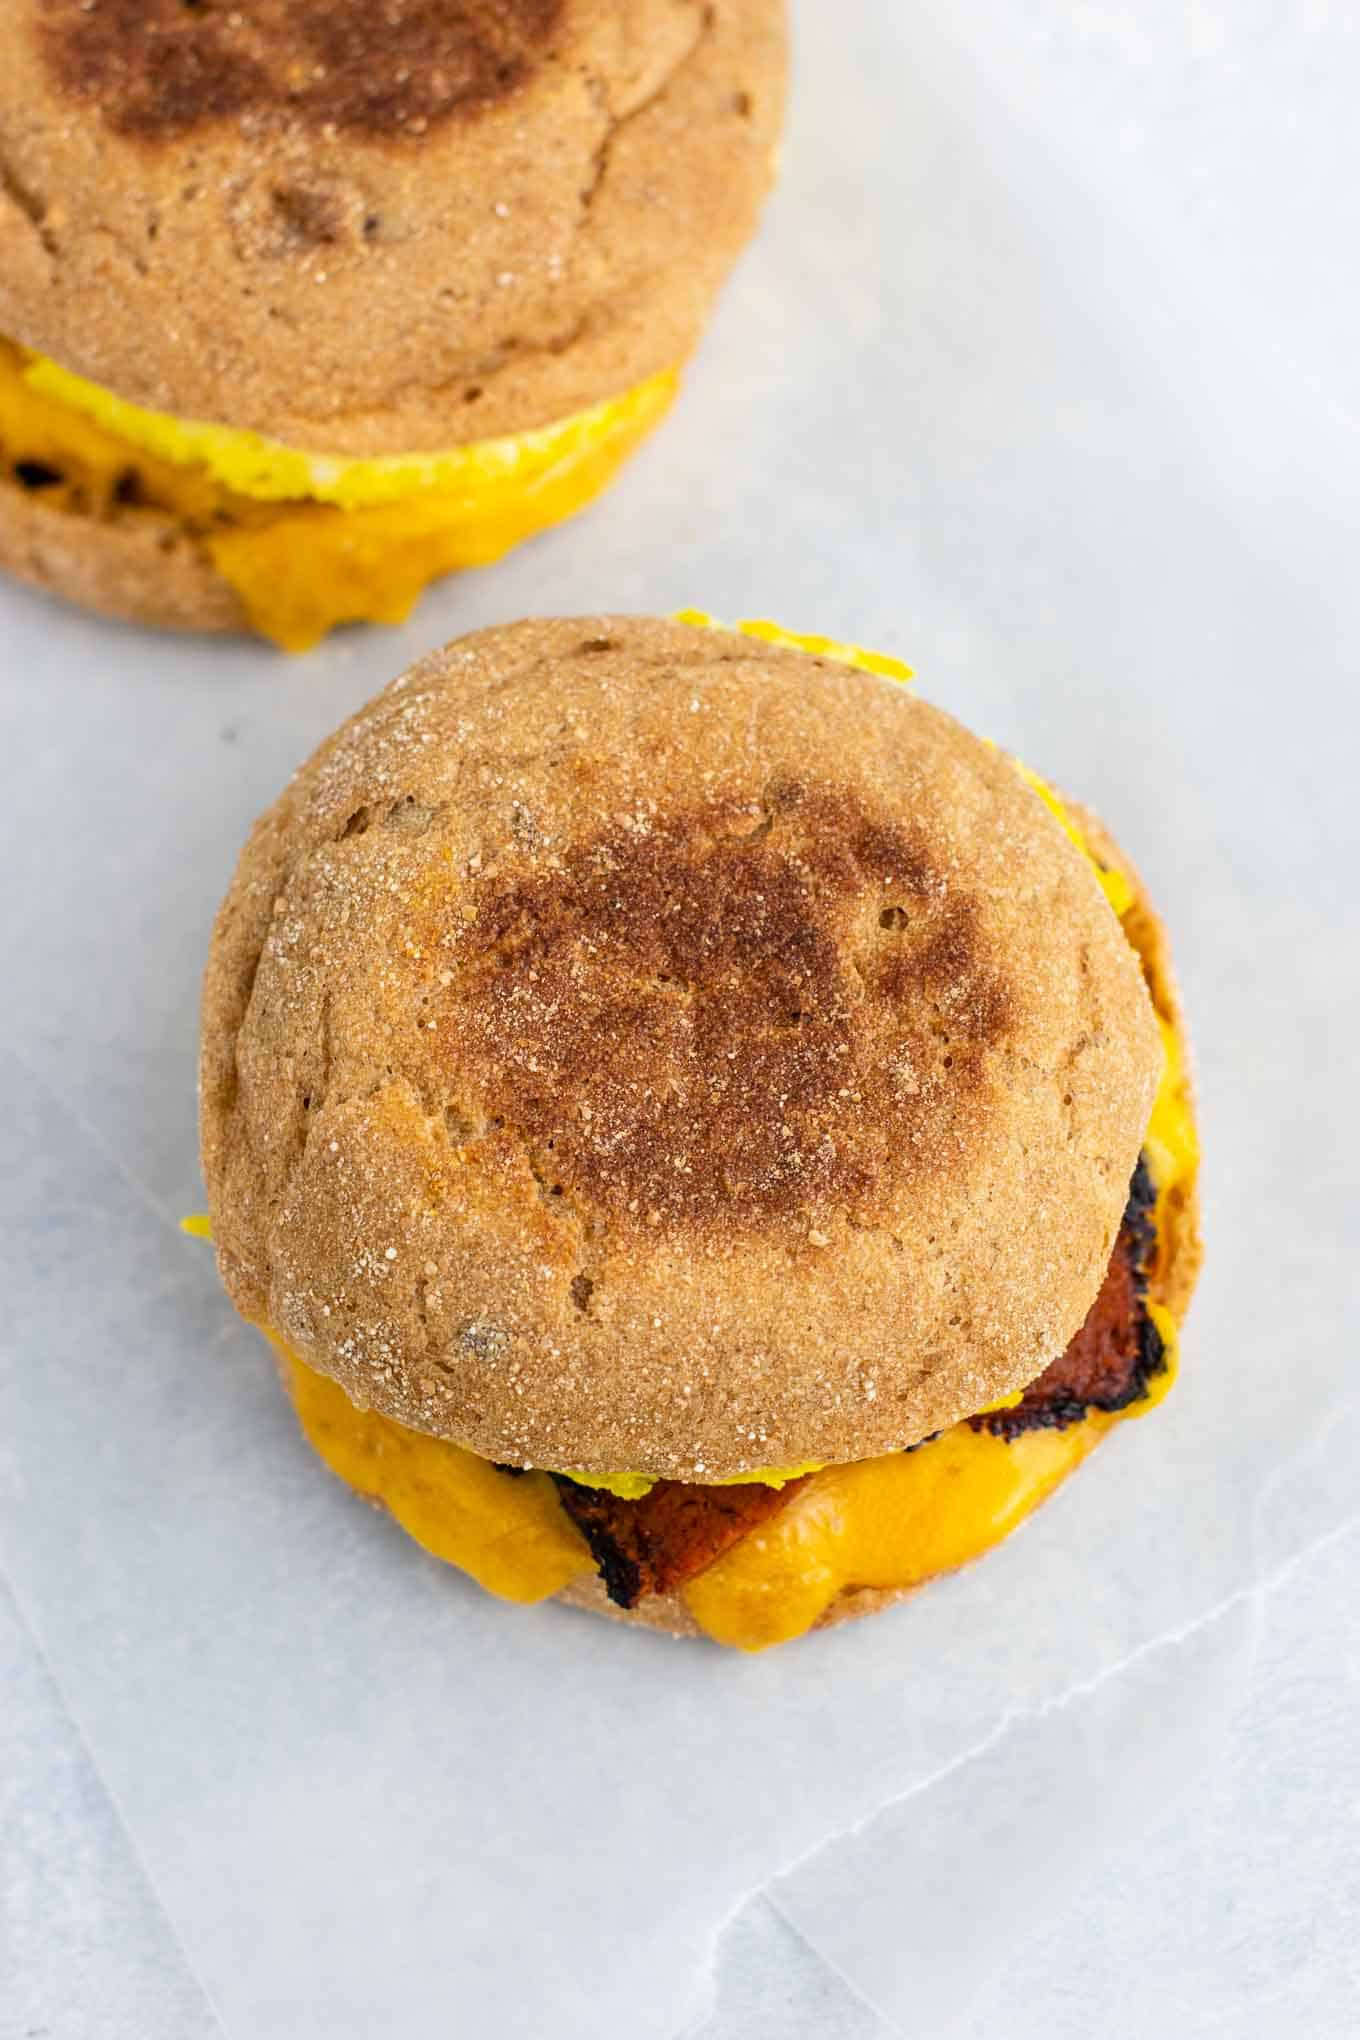 Vegetarian meal prep ideas – these easy English muffin breakfast sandwiches taste amazing and are so easy to make! #vegetarian #breakfast #mealprep #englishmuffin #breakfastsandwich 